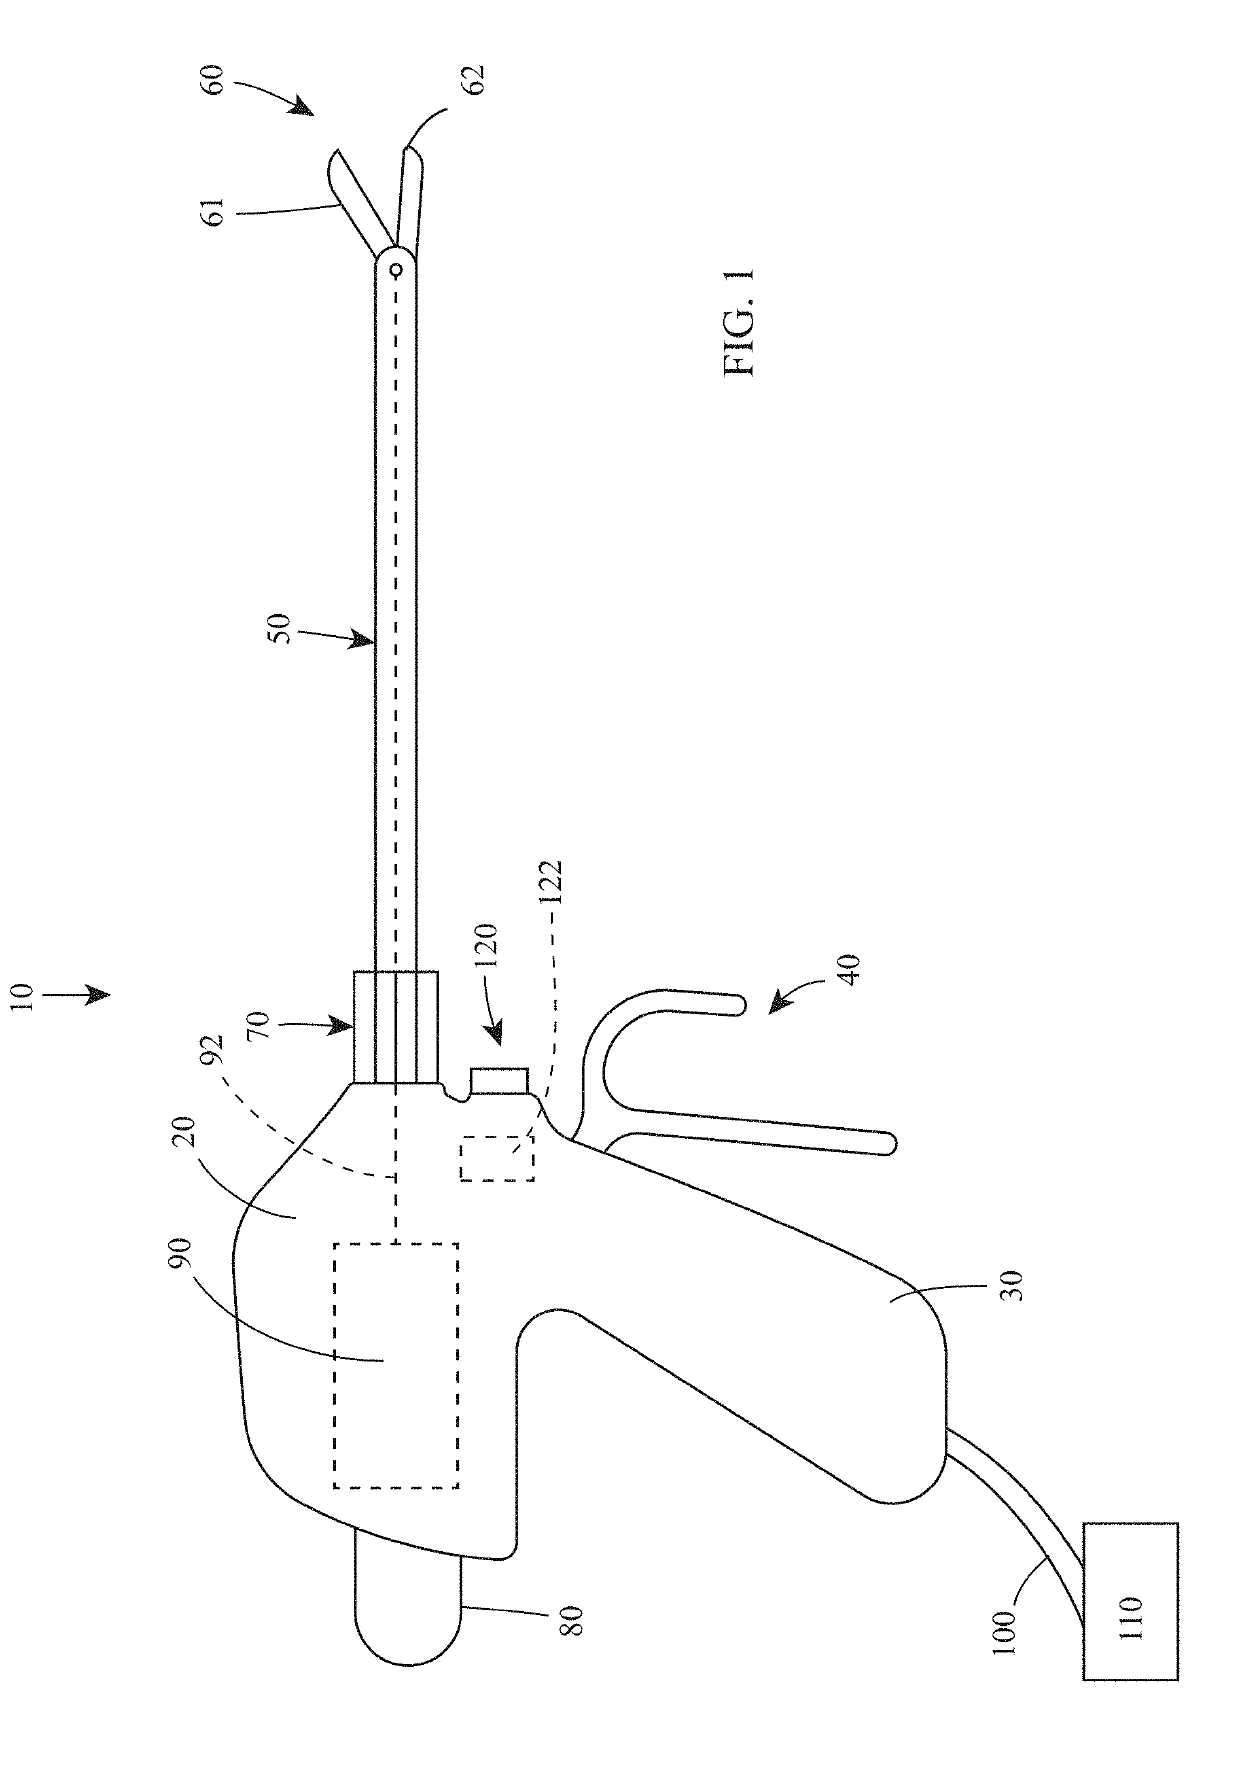 Surgical instruments incorporating ultrasonic and electrosurgical functionality